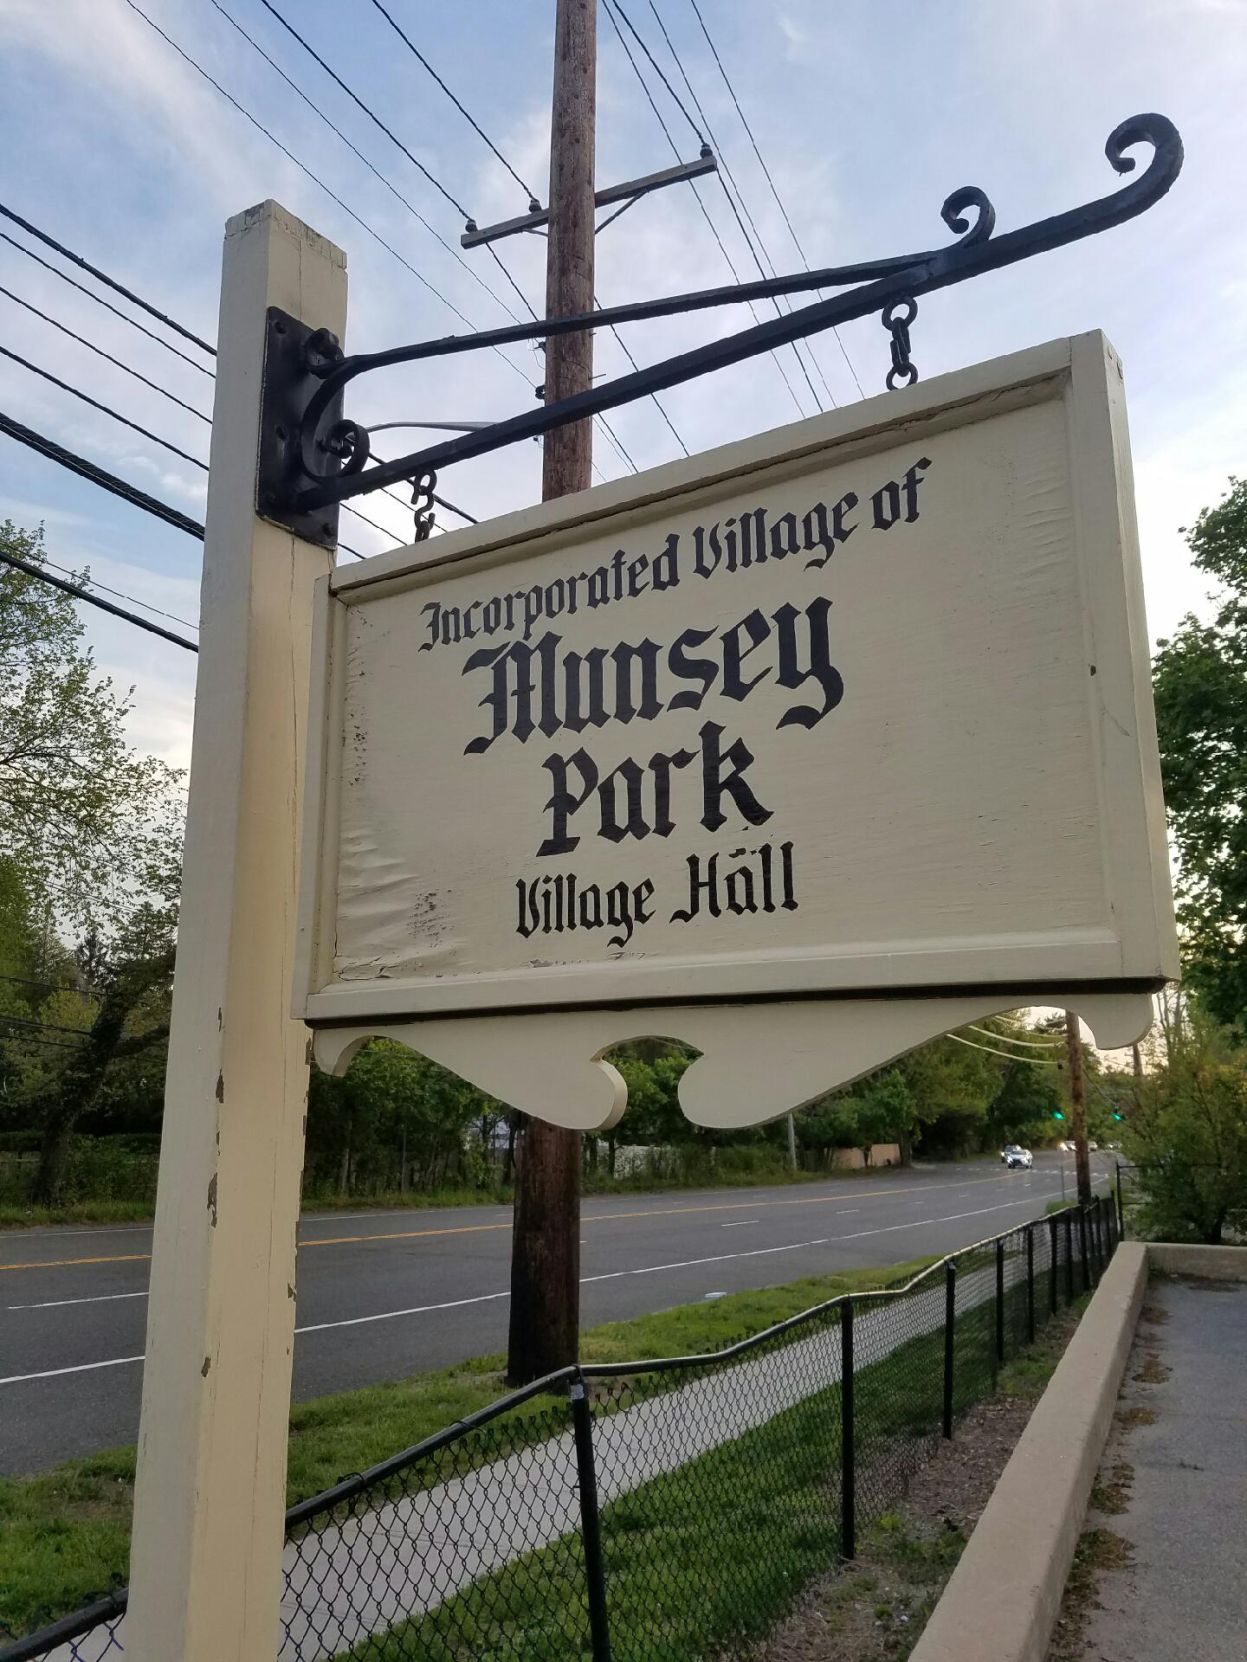 Munsey Park residents air concerns over new house